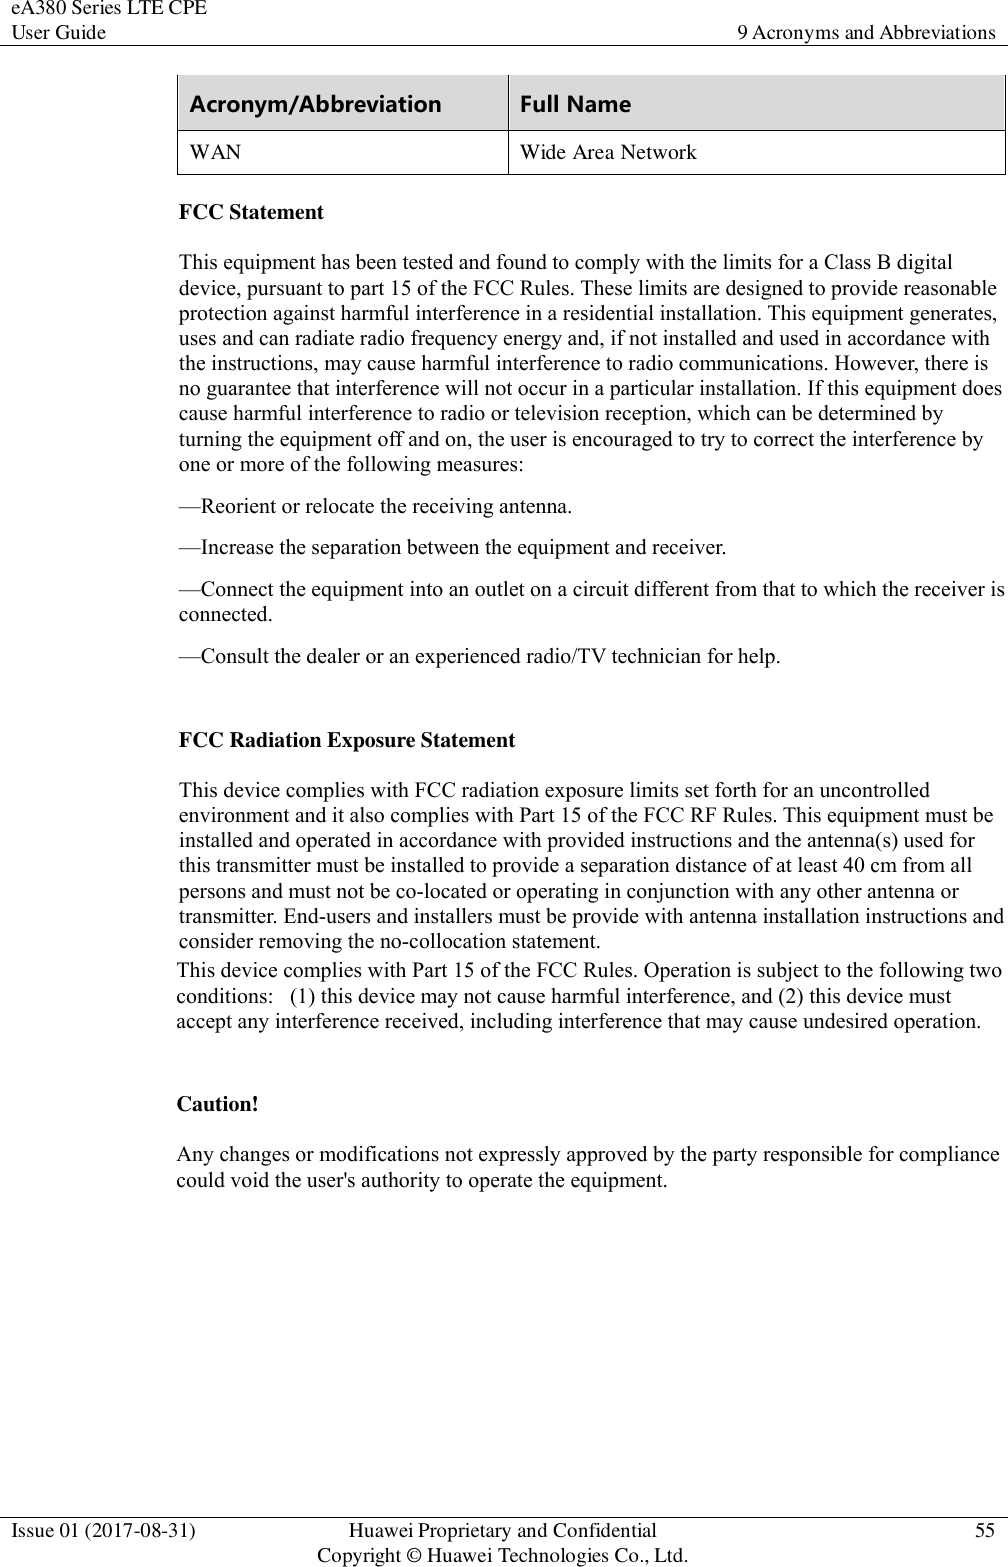 eA380 Series LTE CPE User Guide  9 Acronyms and Abbreviations  Issue 01 (2017-08-31)  Huawei Proprietary and Confidential                                     Copyright © Huawei Technologies Co., Ltd.  55  Acronym/Abbreviation Full Name WAN  Wide Area Network   FCC Statement This equipment has been tested and found to comply with the limits for a Class B digital device, pursuant to part 15 of the FCC Rules. These limits are designed to provide reasonable protection against harmful interference in a residential installation. This equipment generates, uses and can radiate radio frequency energy and, if not installed and used in accordance with the instructions, may cause harmful interference to radio communications. However, there is no guarantee that interference will not occur in a particular installation. If this equipment does cause harmful interference to radio or television reception, which can be determined by turning the equipment off and on, the user is encouraged to try to correct the interference by one or more of the following measures:   —Reorient or relocate the receiving antenna. —Increase the separation between the equipment and receiver.   —Connect the equipment into an outlet on a circuit different from that to which the receiver is connected.  —Consult the dealer or an experienced radio/TV technician for help.   FCC Radiation Exposure Statement   This device complies with FCC radiation exposure limits set forth for an uncontrolled environment and it also complies with Part 15 of the FCC RF Rules. This equipment must be installed and operated in accordance with provided instructions and the antenna(s) used for this transmitter must be installed to provide a separation distance of at least 40 cm from all persons and must not be co-located or operating in conjunction with any other antenna or transmitter. End-users and installers must be provide with antenna installation instructions and consider removing the no-collocation statement. This device complies with Part 15 of the FCC Rules. Operation is subject to the following two conditions:   (1) this device may not cause harmful interference, and (2) this device must accept any interference received, including interference that may cause undesired operation. Caution!    Any changes or modifications not expressly approved by the party responsible for compliance could void the user&apos;s authority to operate the equipment. 